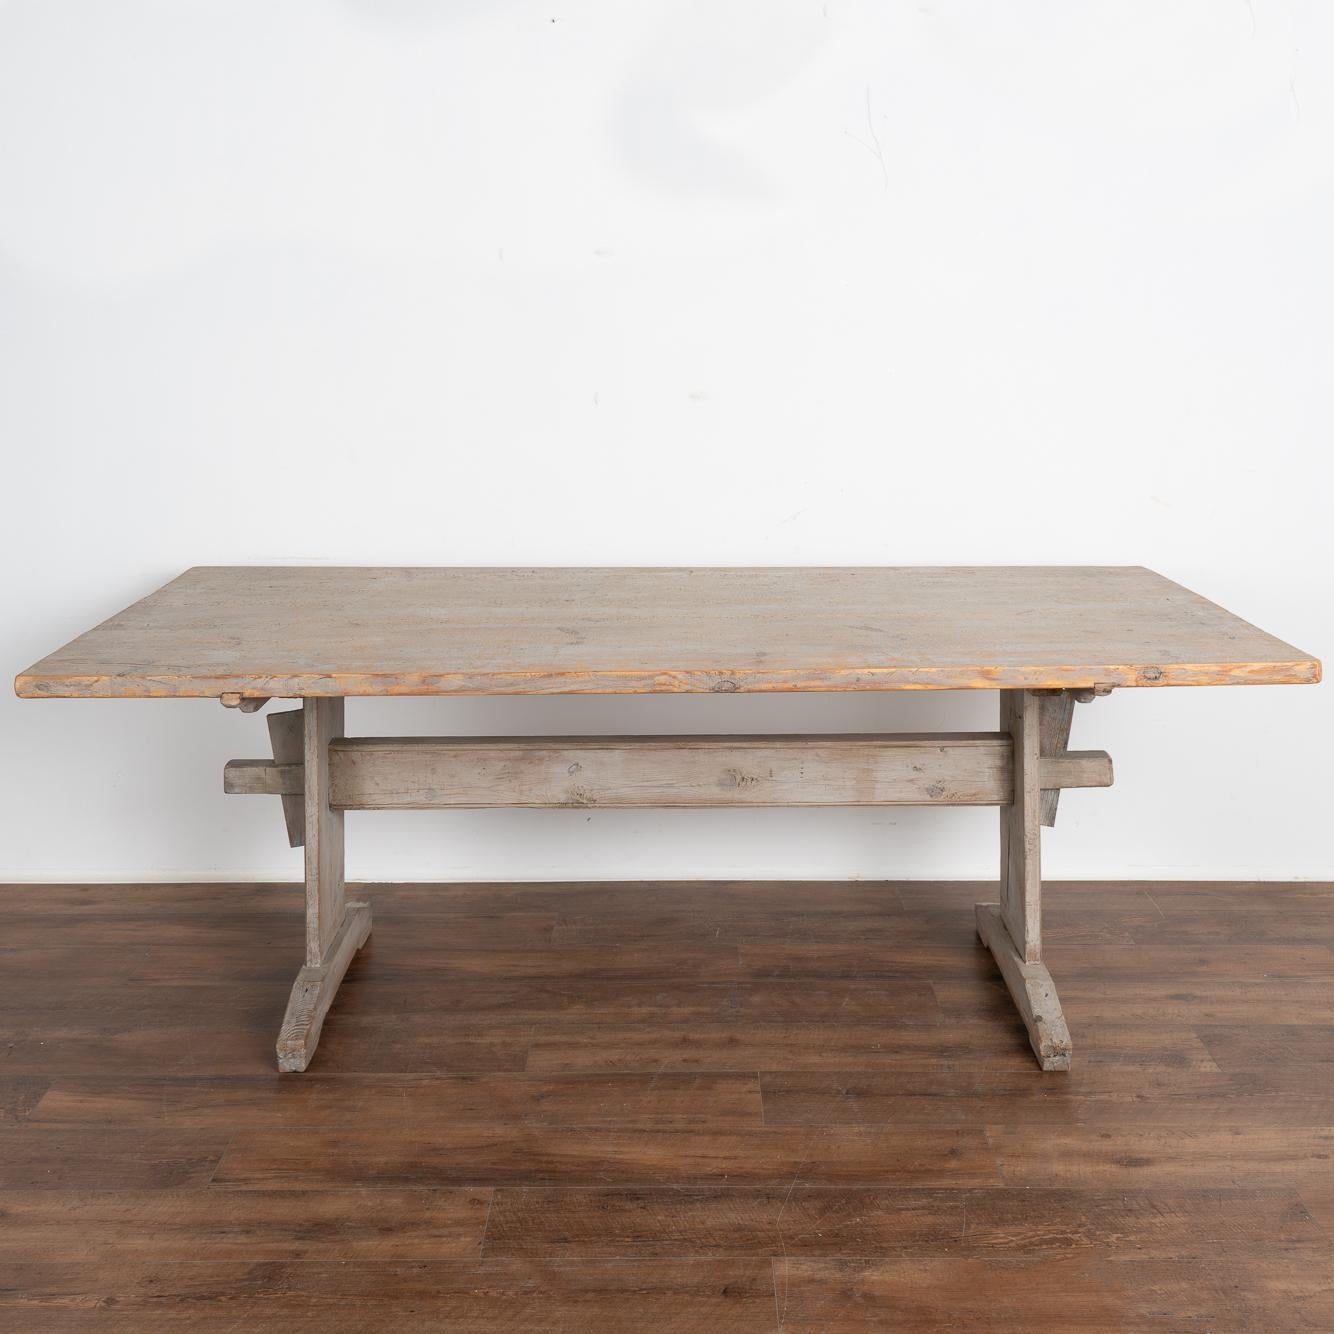 Country Original Gray Painted Farm Table Dining Table from Sweden, circa 1880